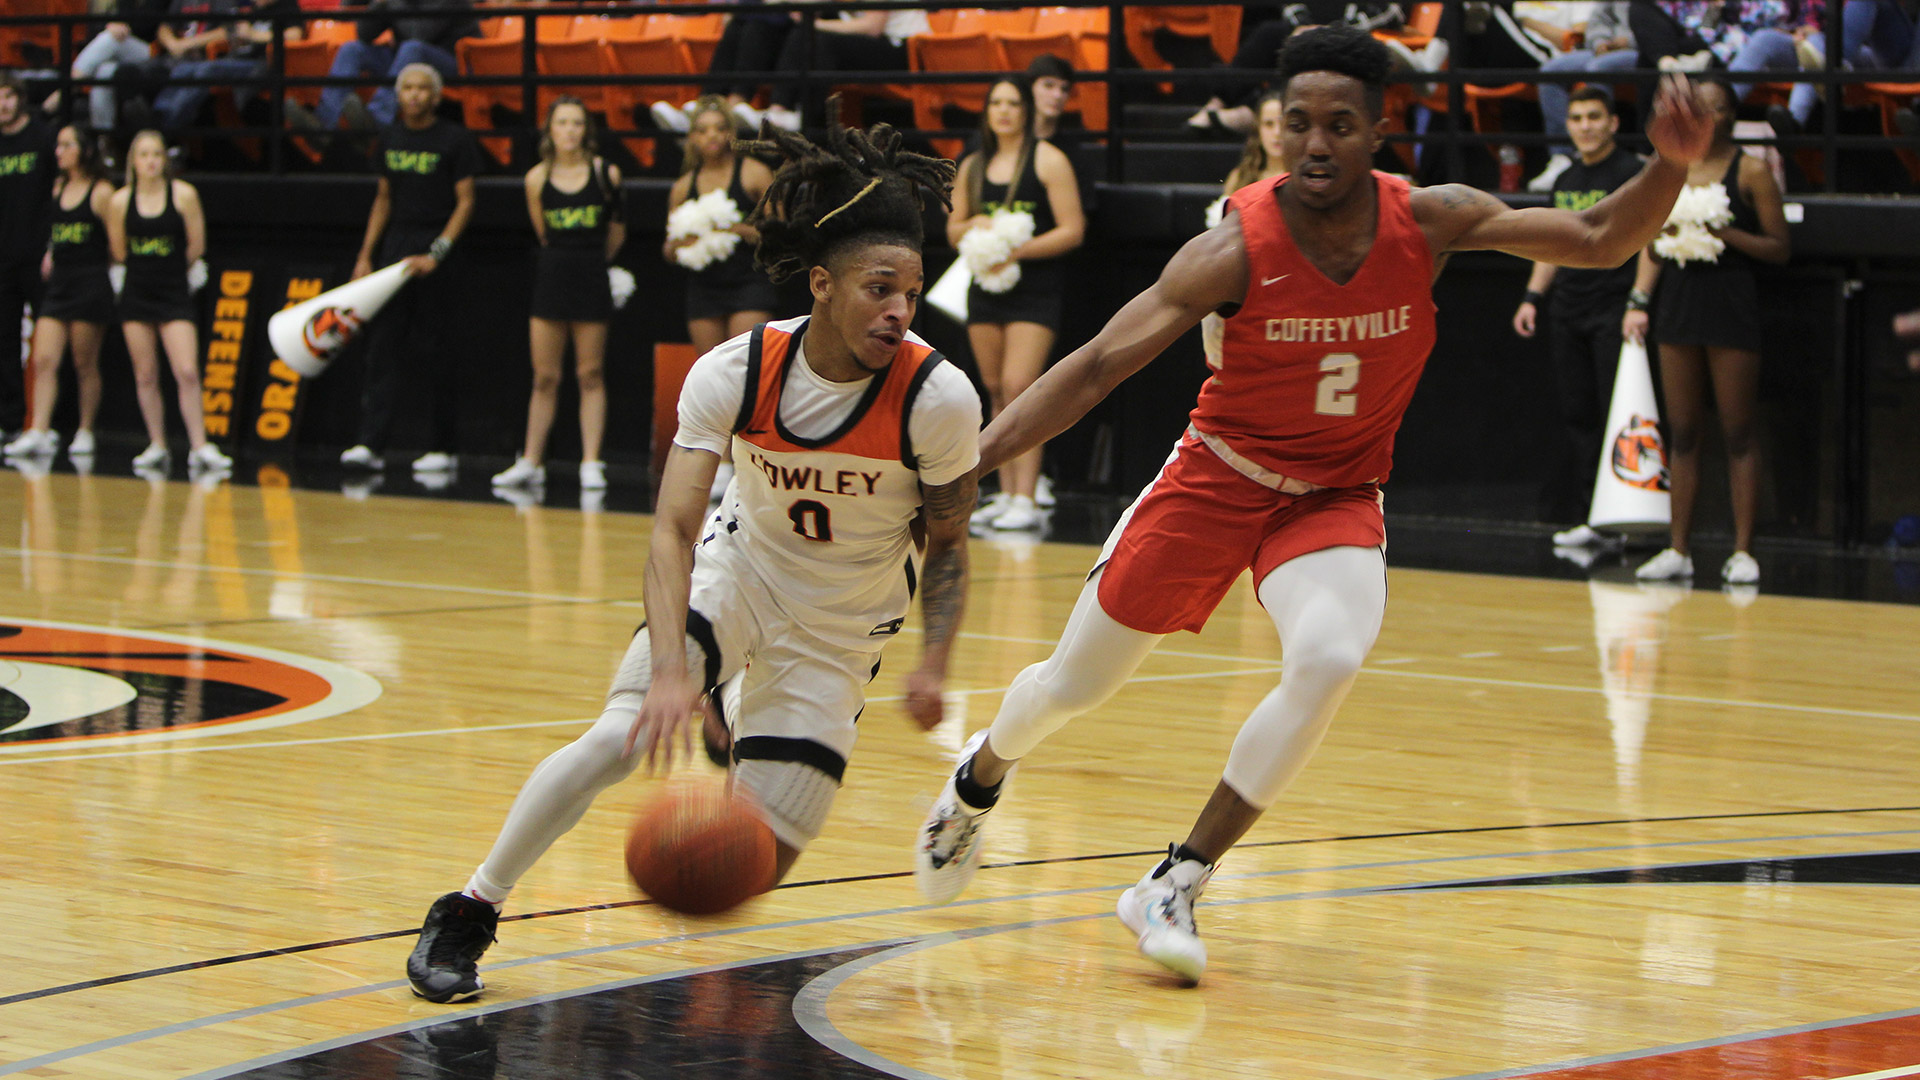 Tigers battle back before losing overtime contest against Coffeyville